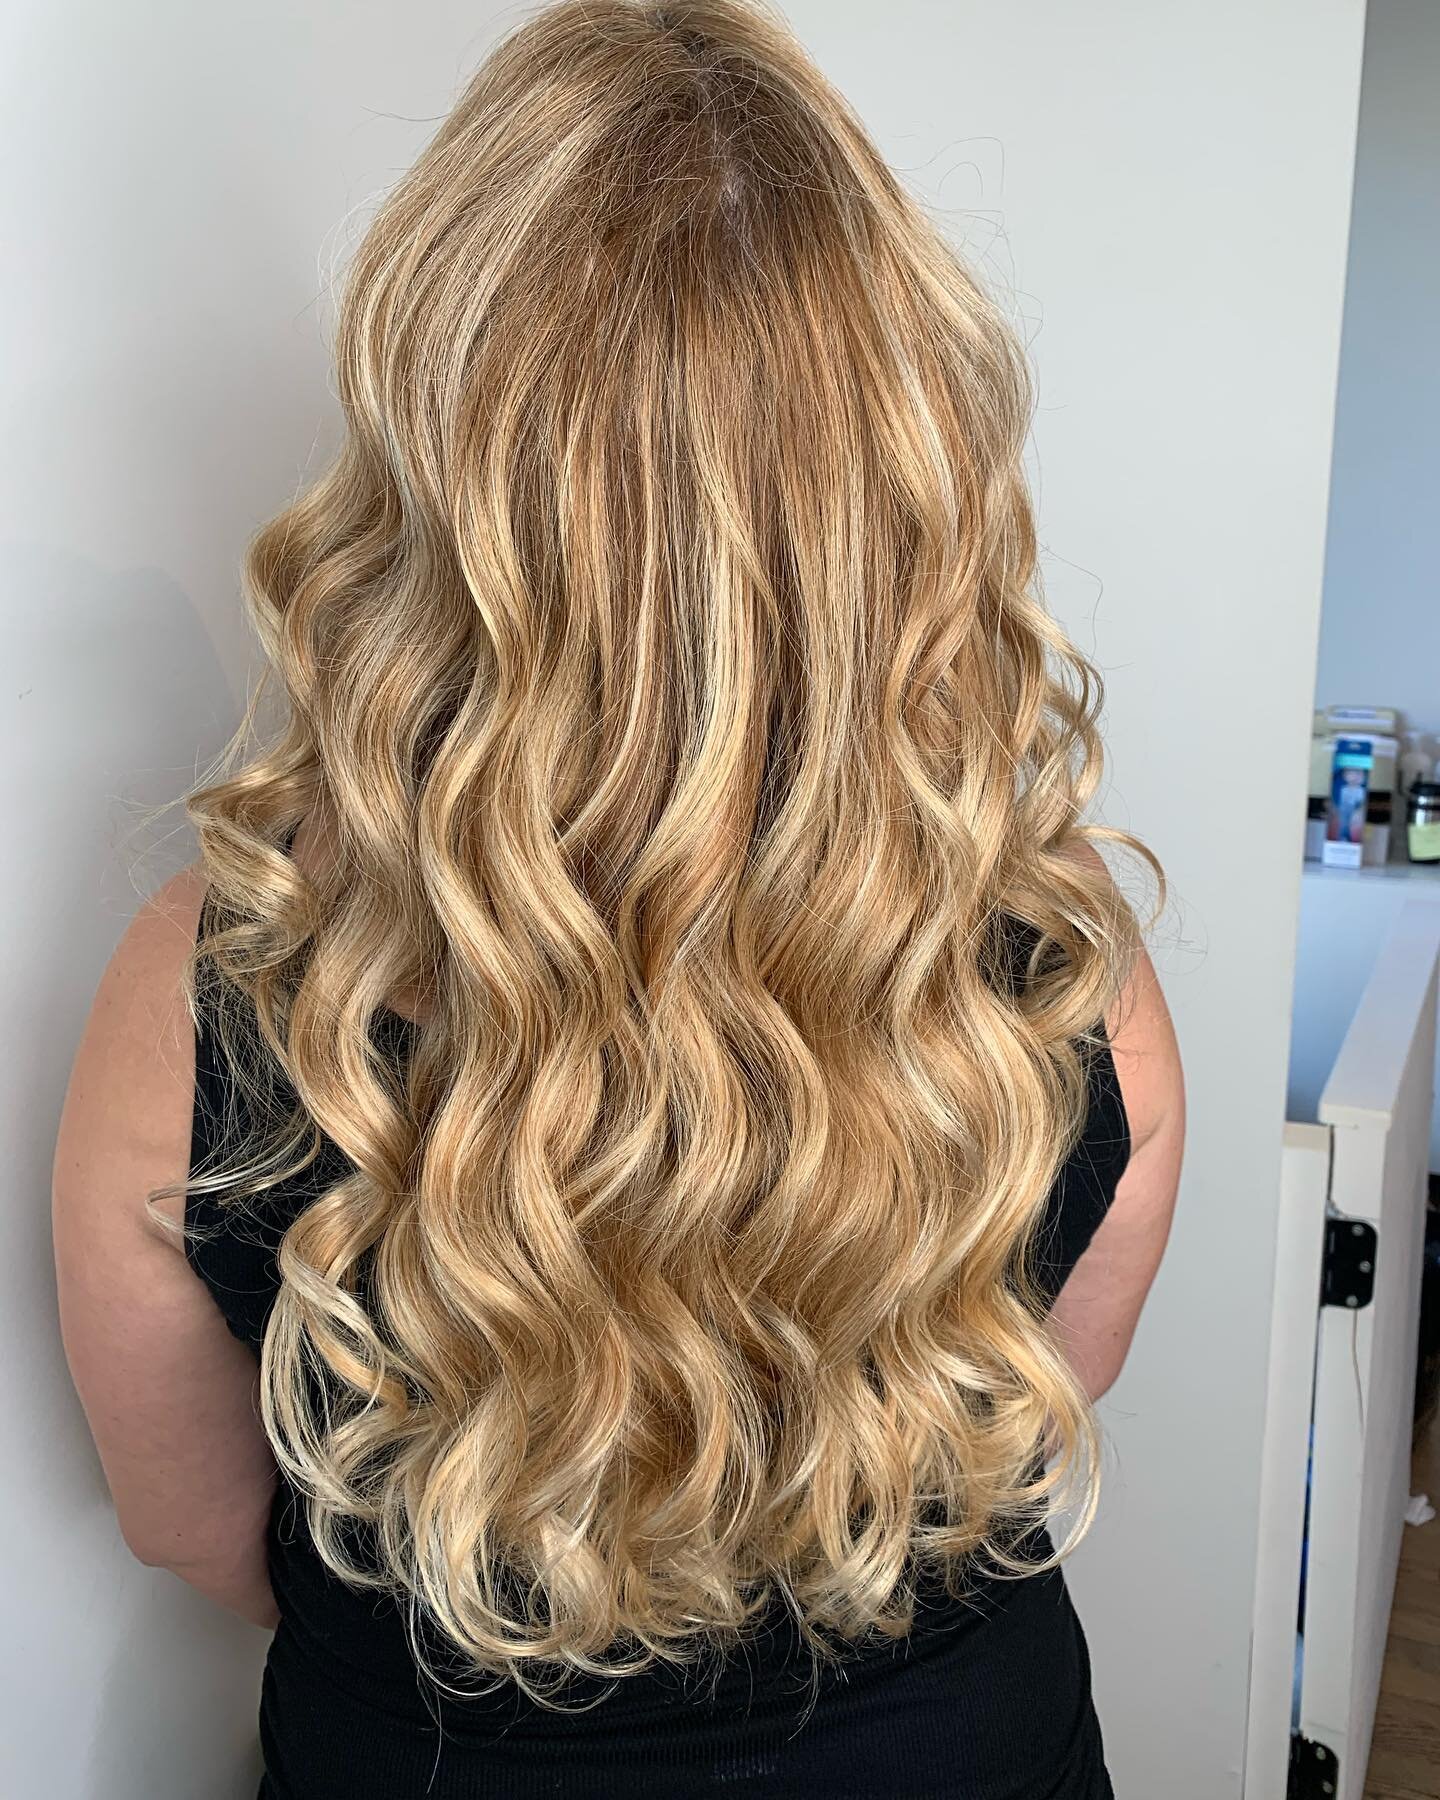 Golden Blonde Balayage - Swipe for before pic